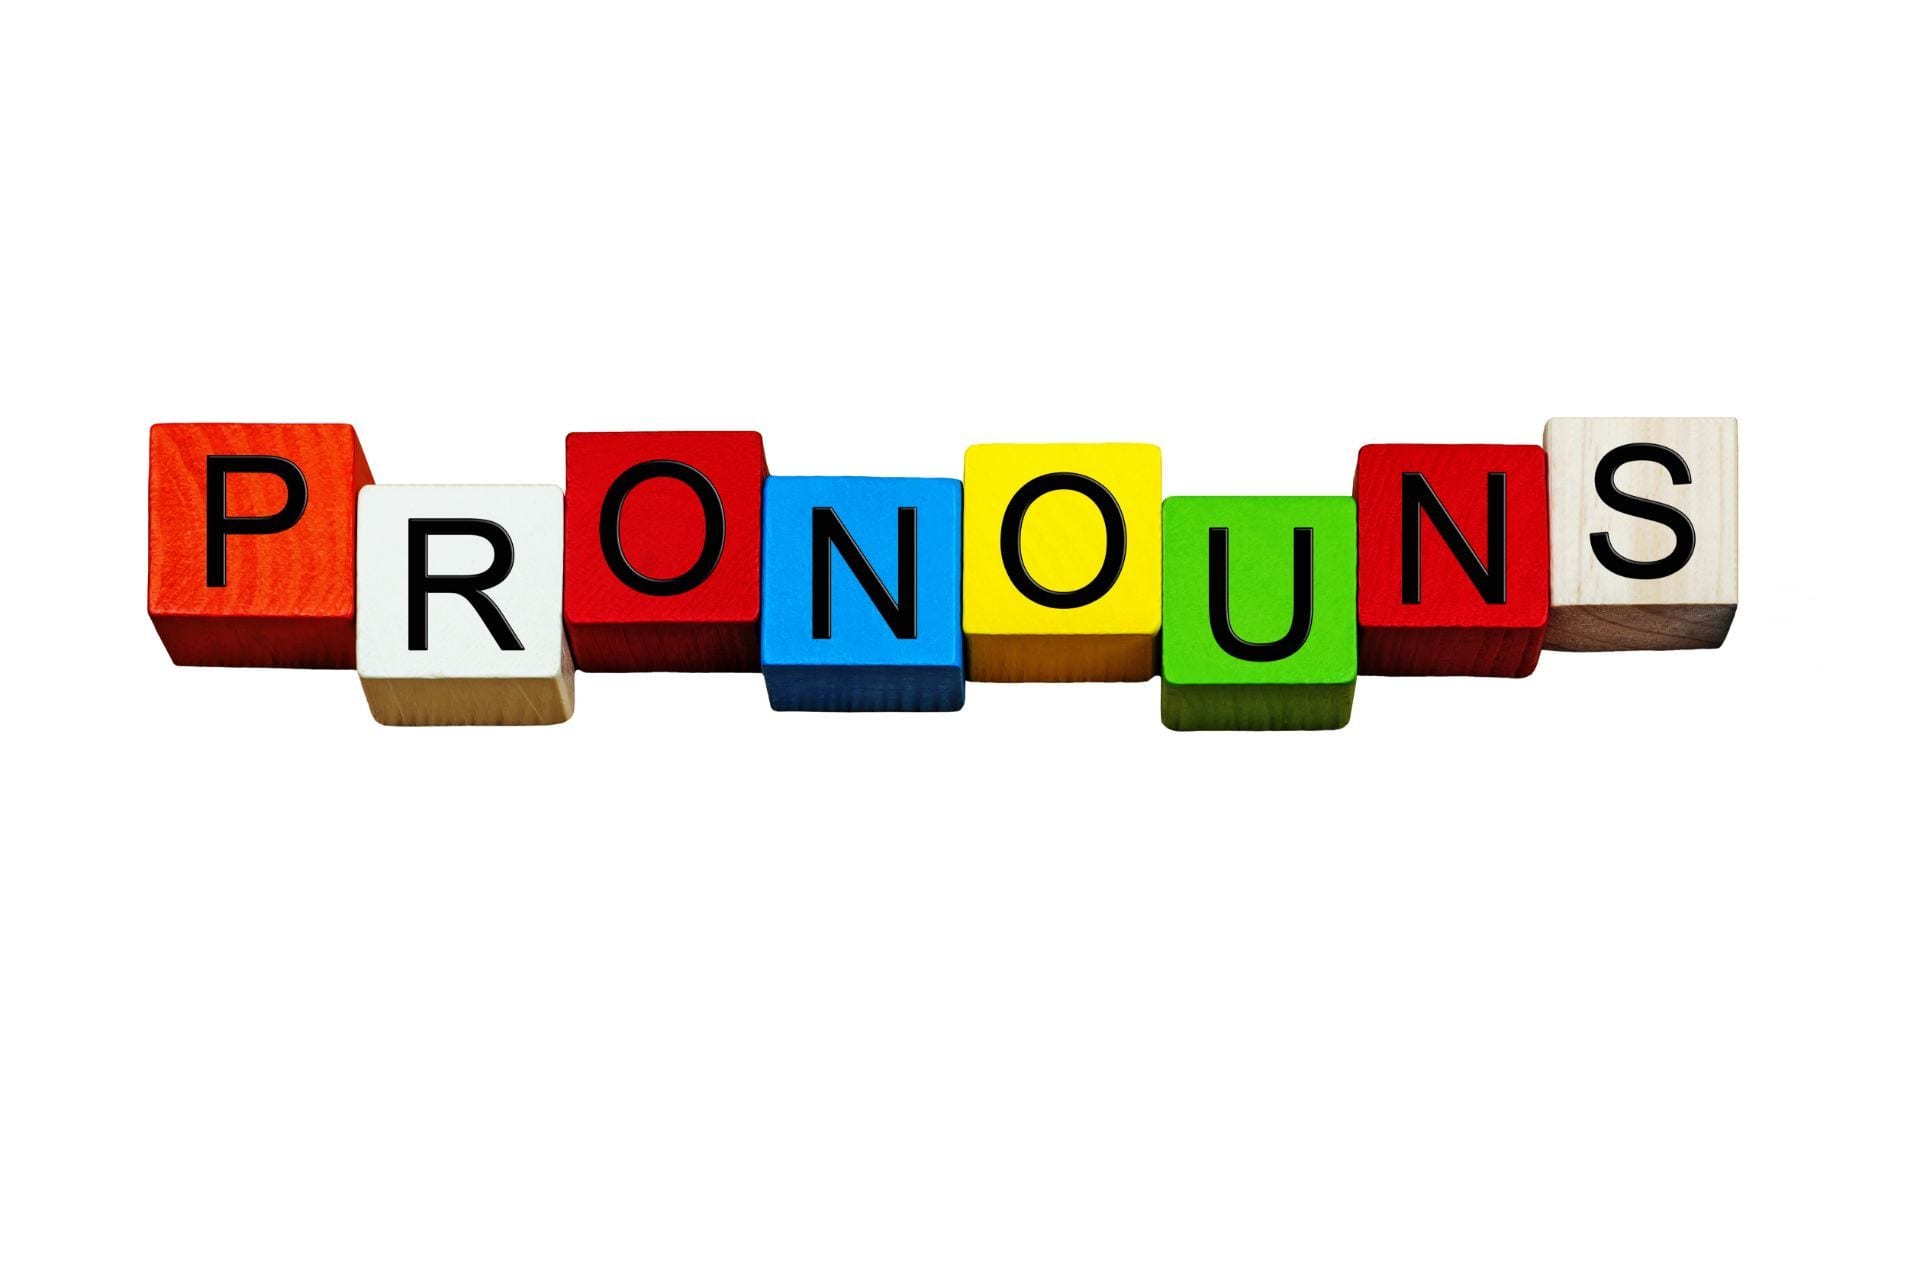 micro-learning-lesson-1-pronouns-in-the-subjective-and-objective-case